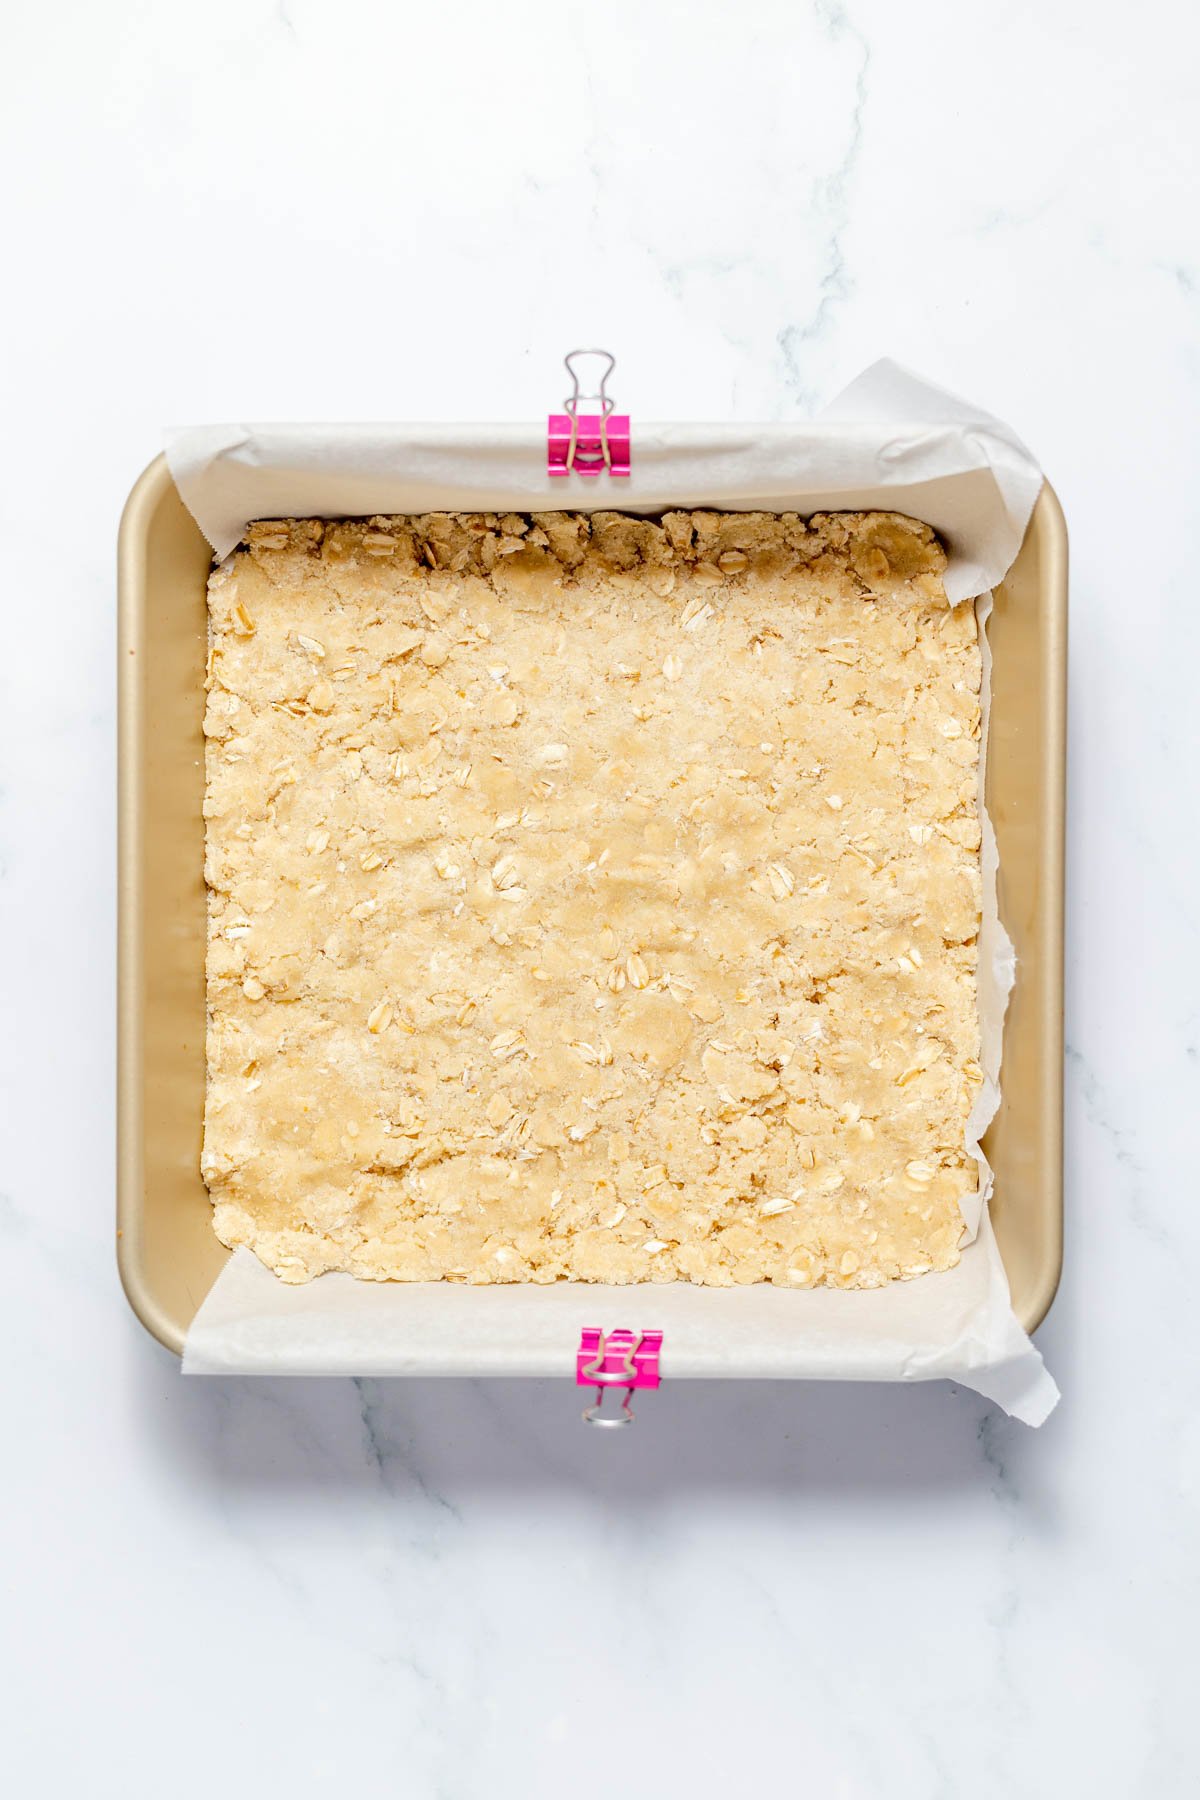 Pressing a portion of the oat crumble mixture into the bottom of a square baking dish.